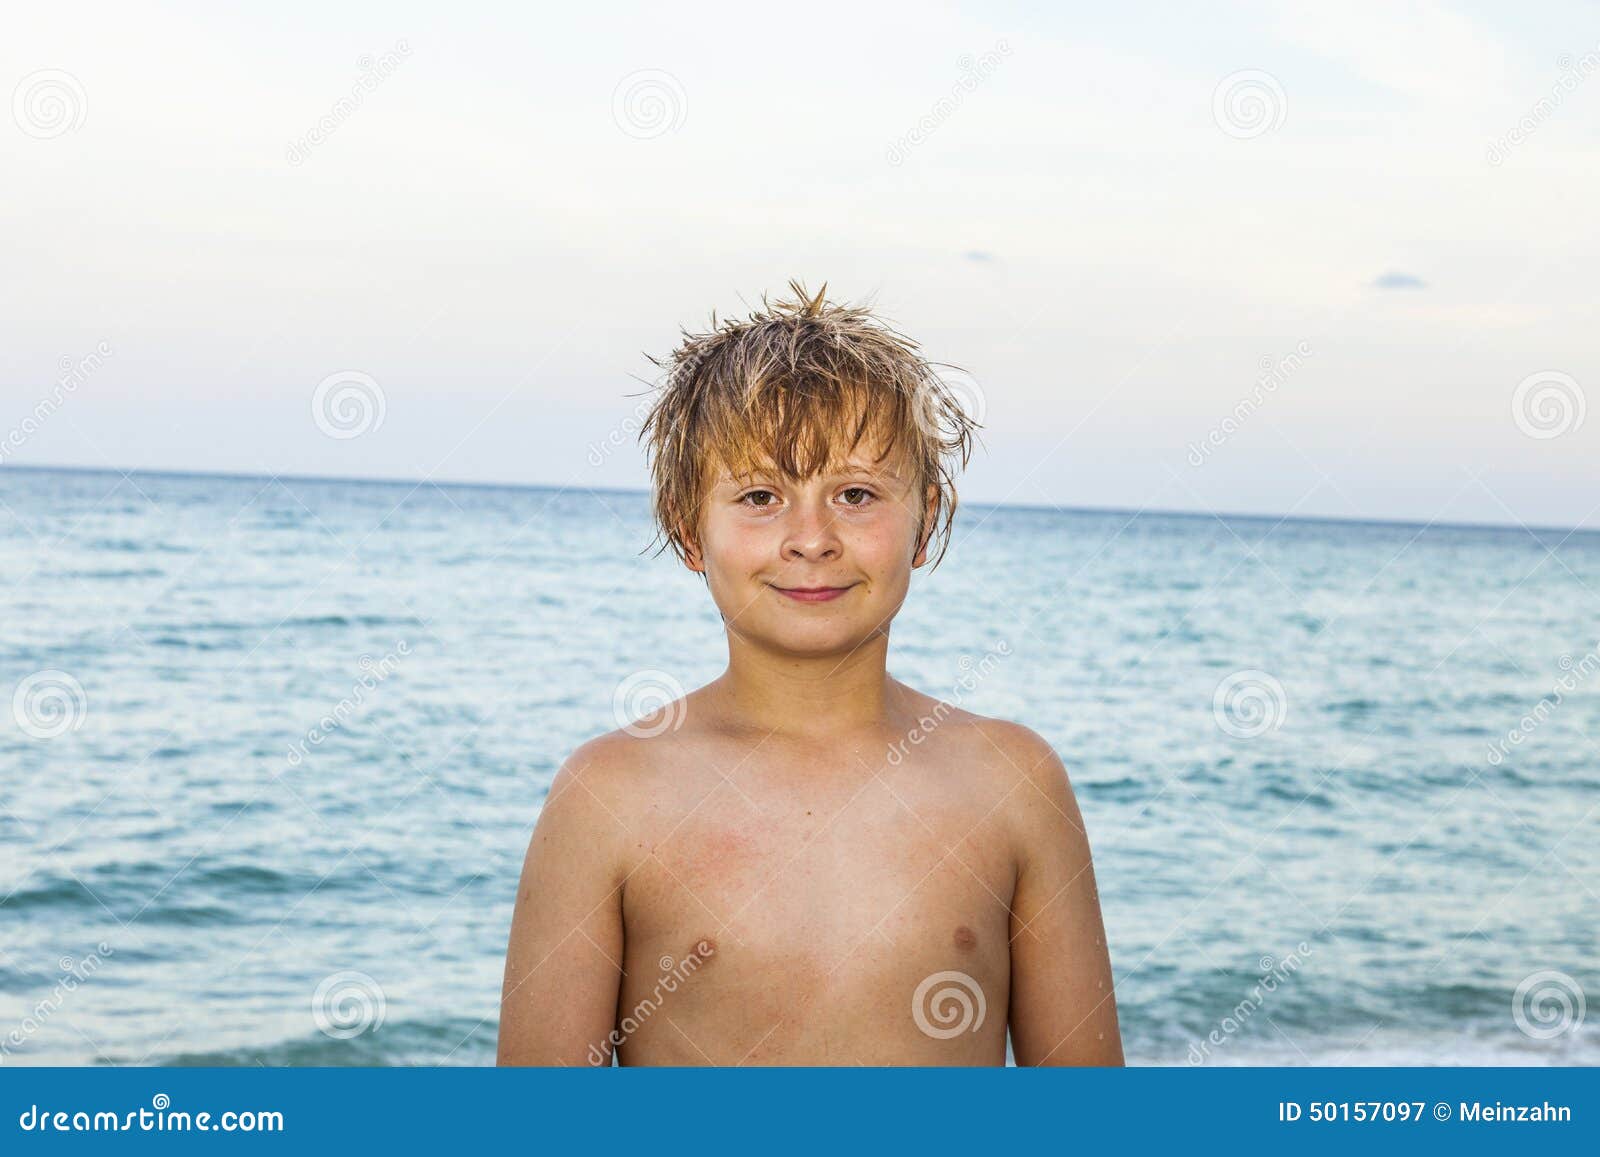 Happy boy at the beach stock image. Image of friendly - 50157097